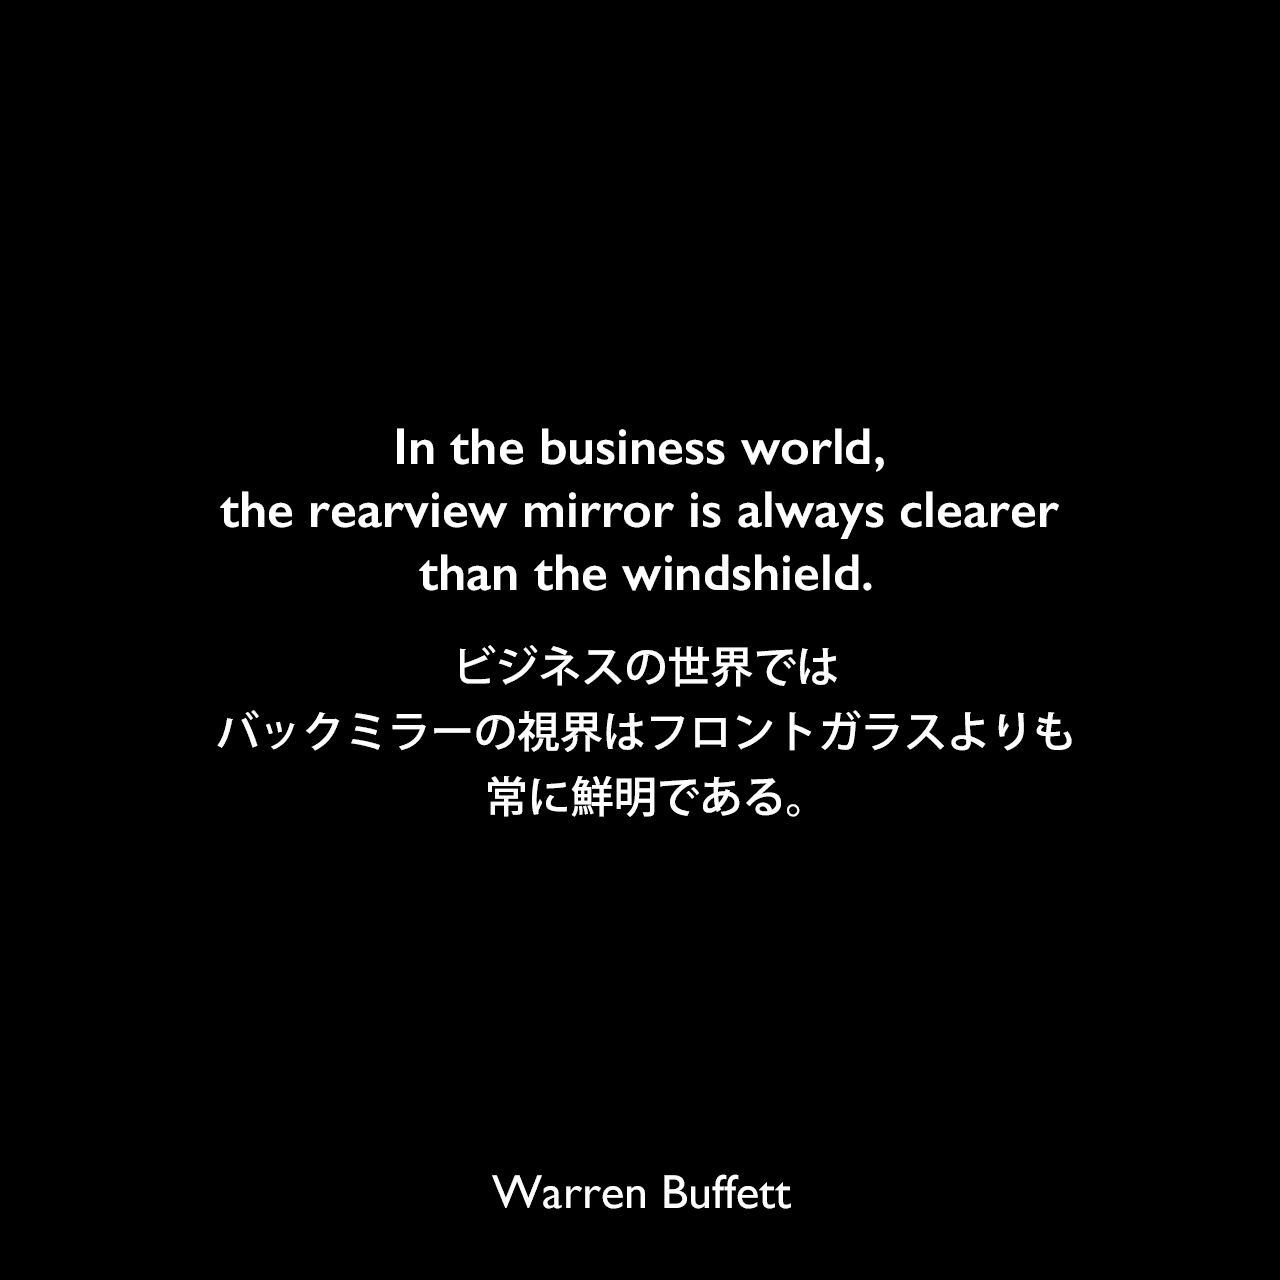 In the business world, the rearview mirror is always clearer than the windshield.ビジネスの世界では、バックミラーの視界はフロントガラスよりも常に鮮明である。